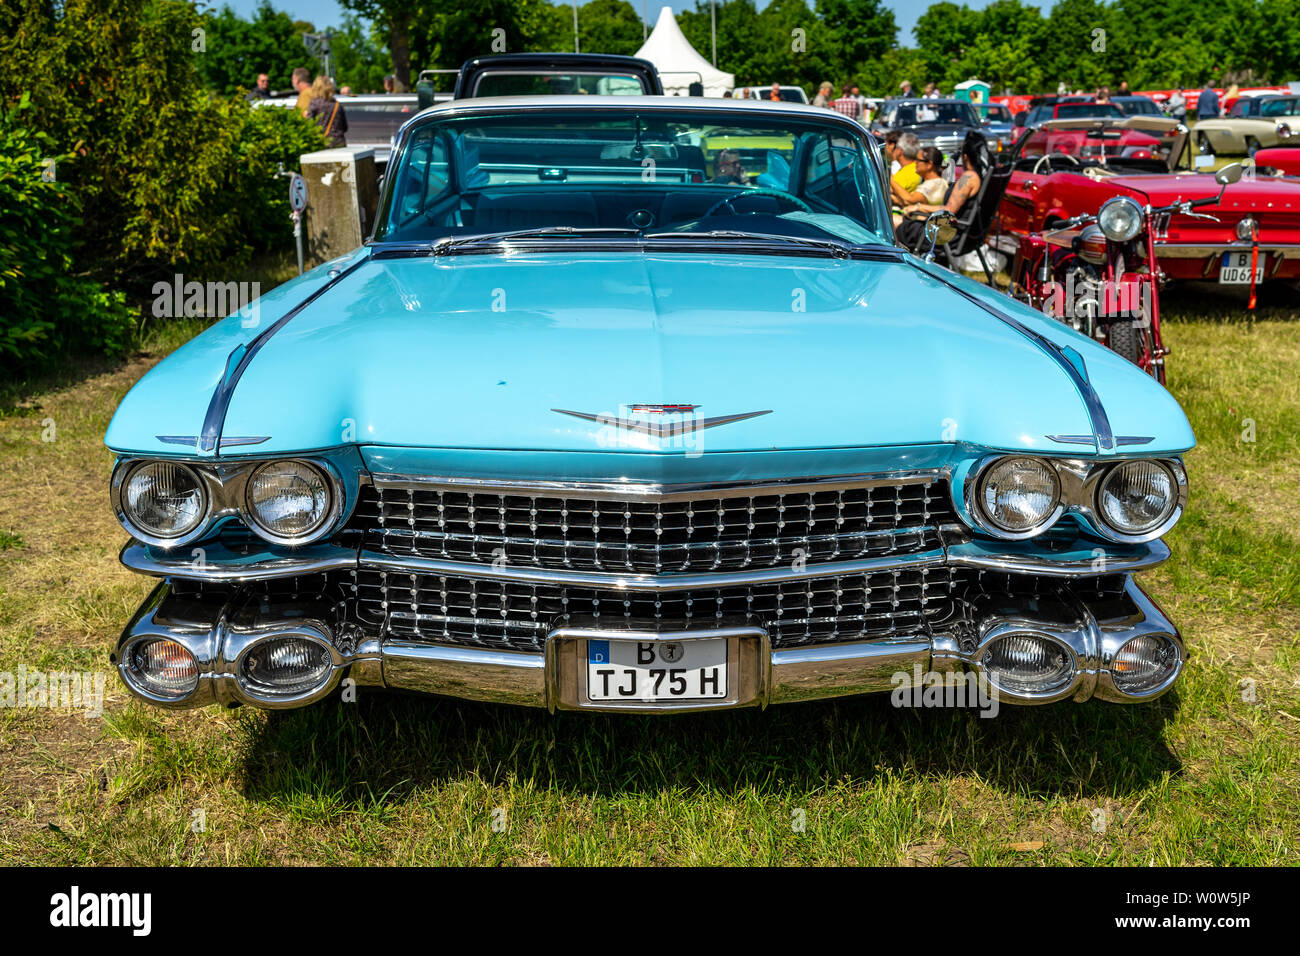 PAAREN IM GLIEN, GERMANY - MAY 19, 2018: Full-size luxury car Cadillac Coupe de Ville, 1960. Die Oldtimer Show 2018. Stock Photo